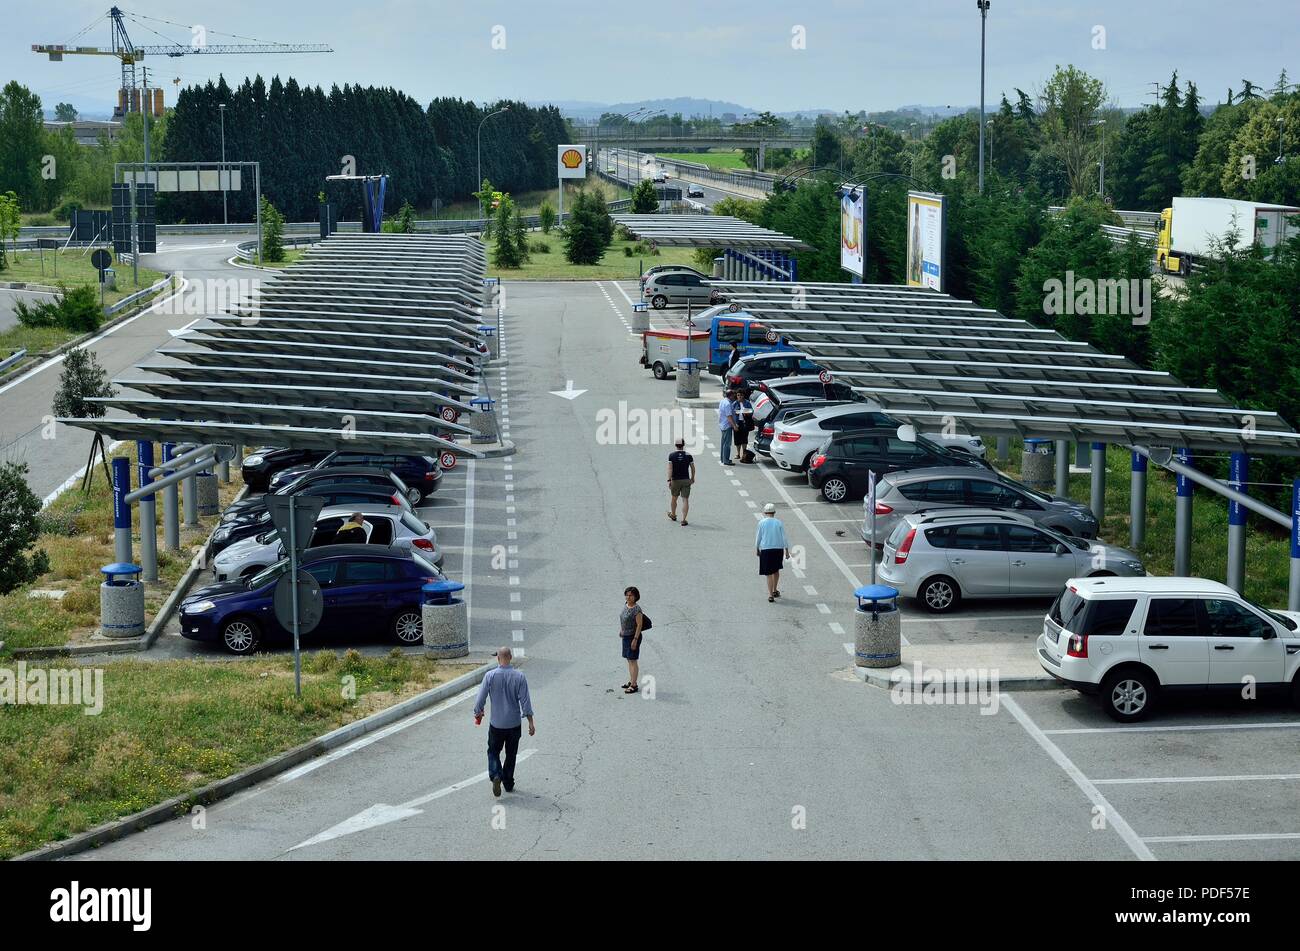 Car Parking Area / Car Parking Lot covered with Solar Panels near Shell Petrol station / Gas / Fuel Station along side a highway near Pisa, Italy Stock Photo